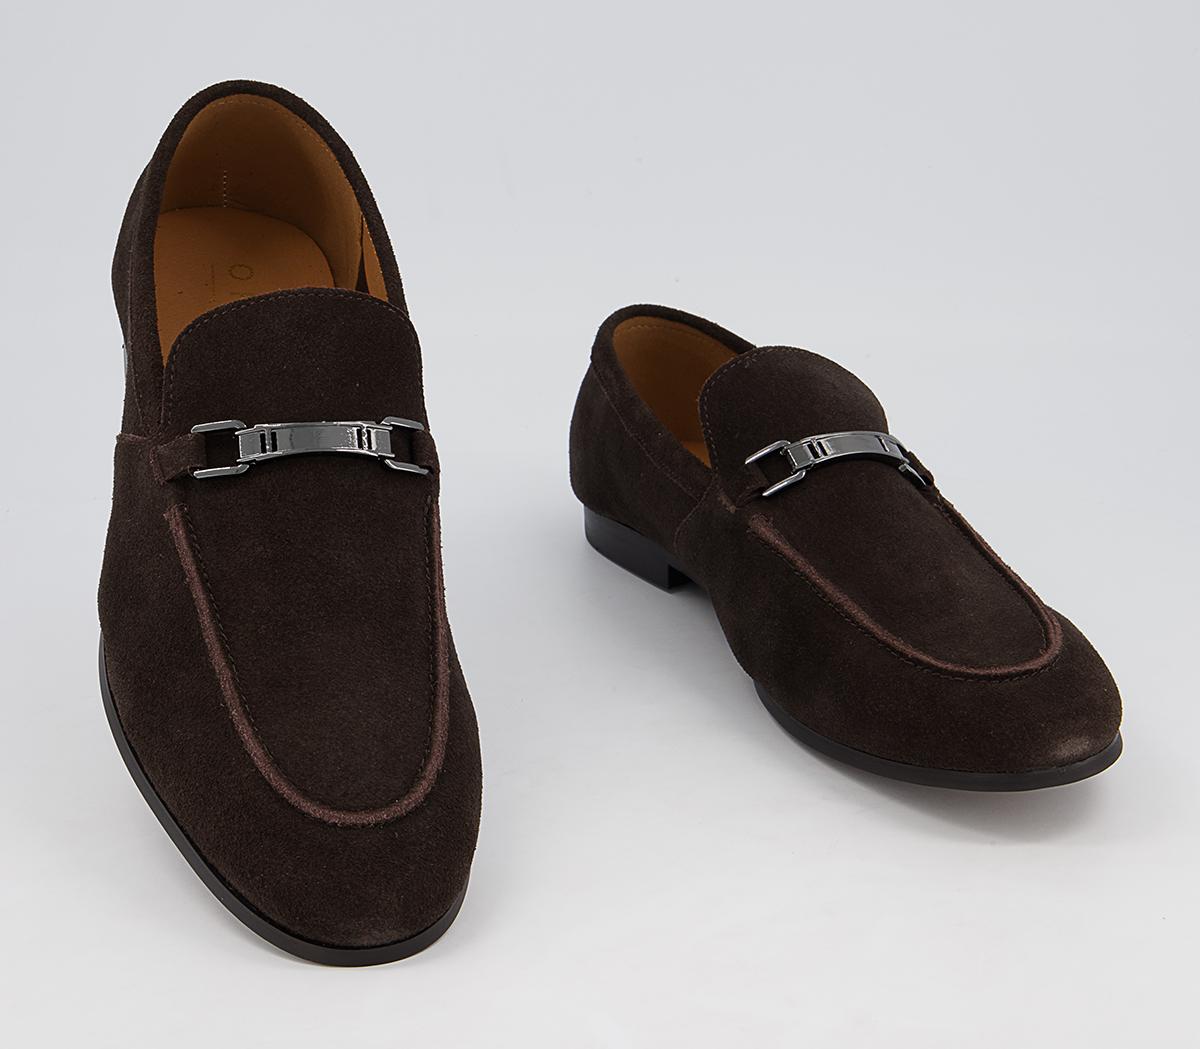 OFFICE Madley Loafers Brown Suede - Men’s Smart Shoes